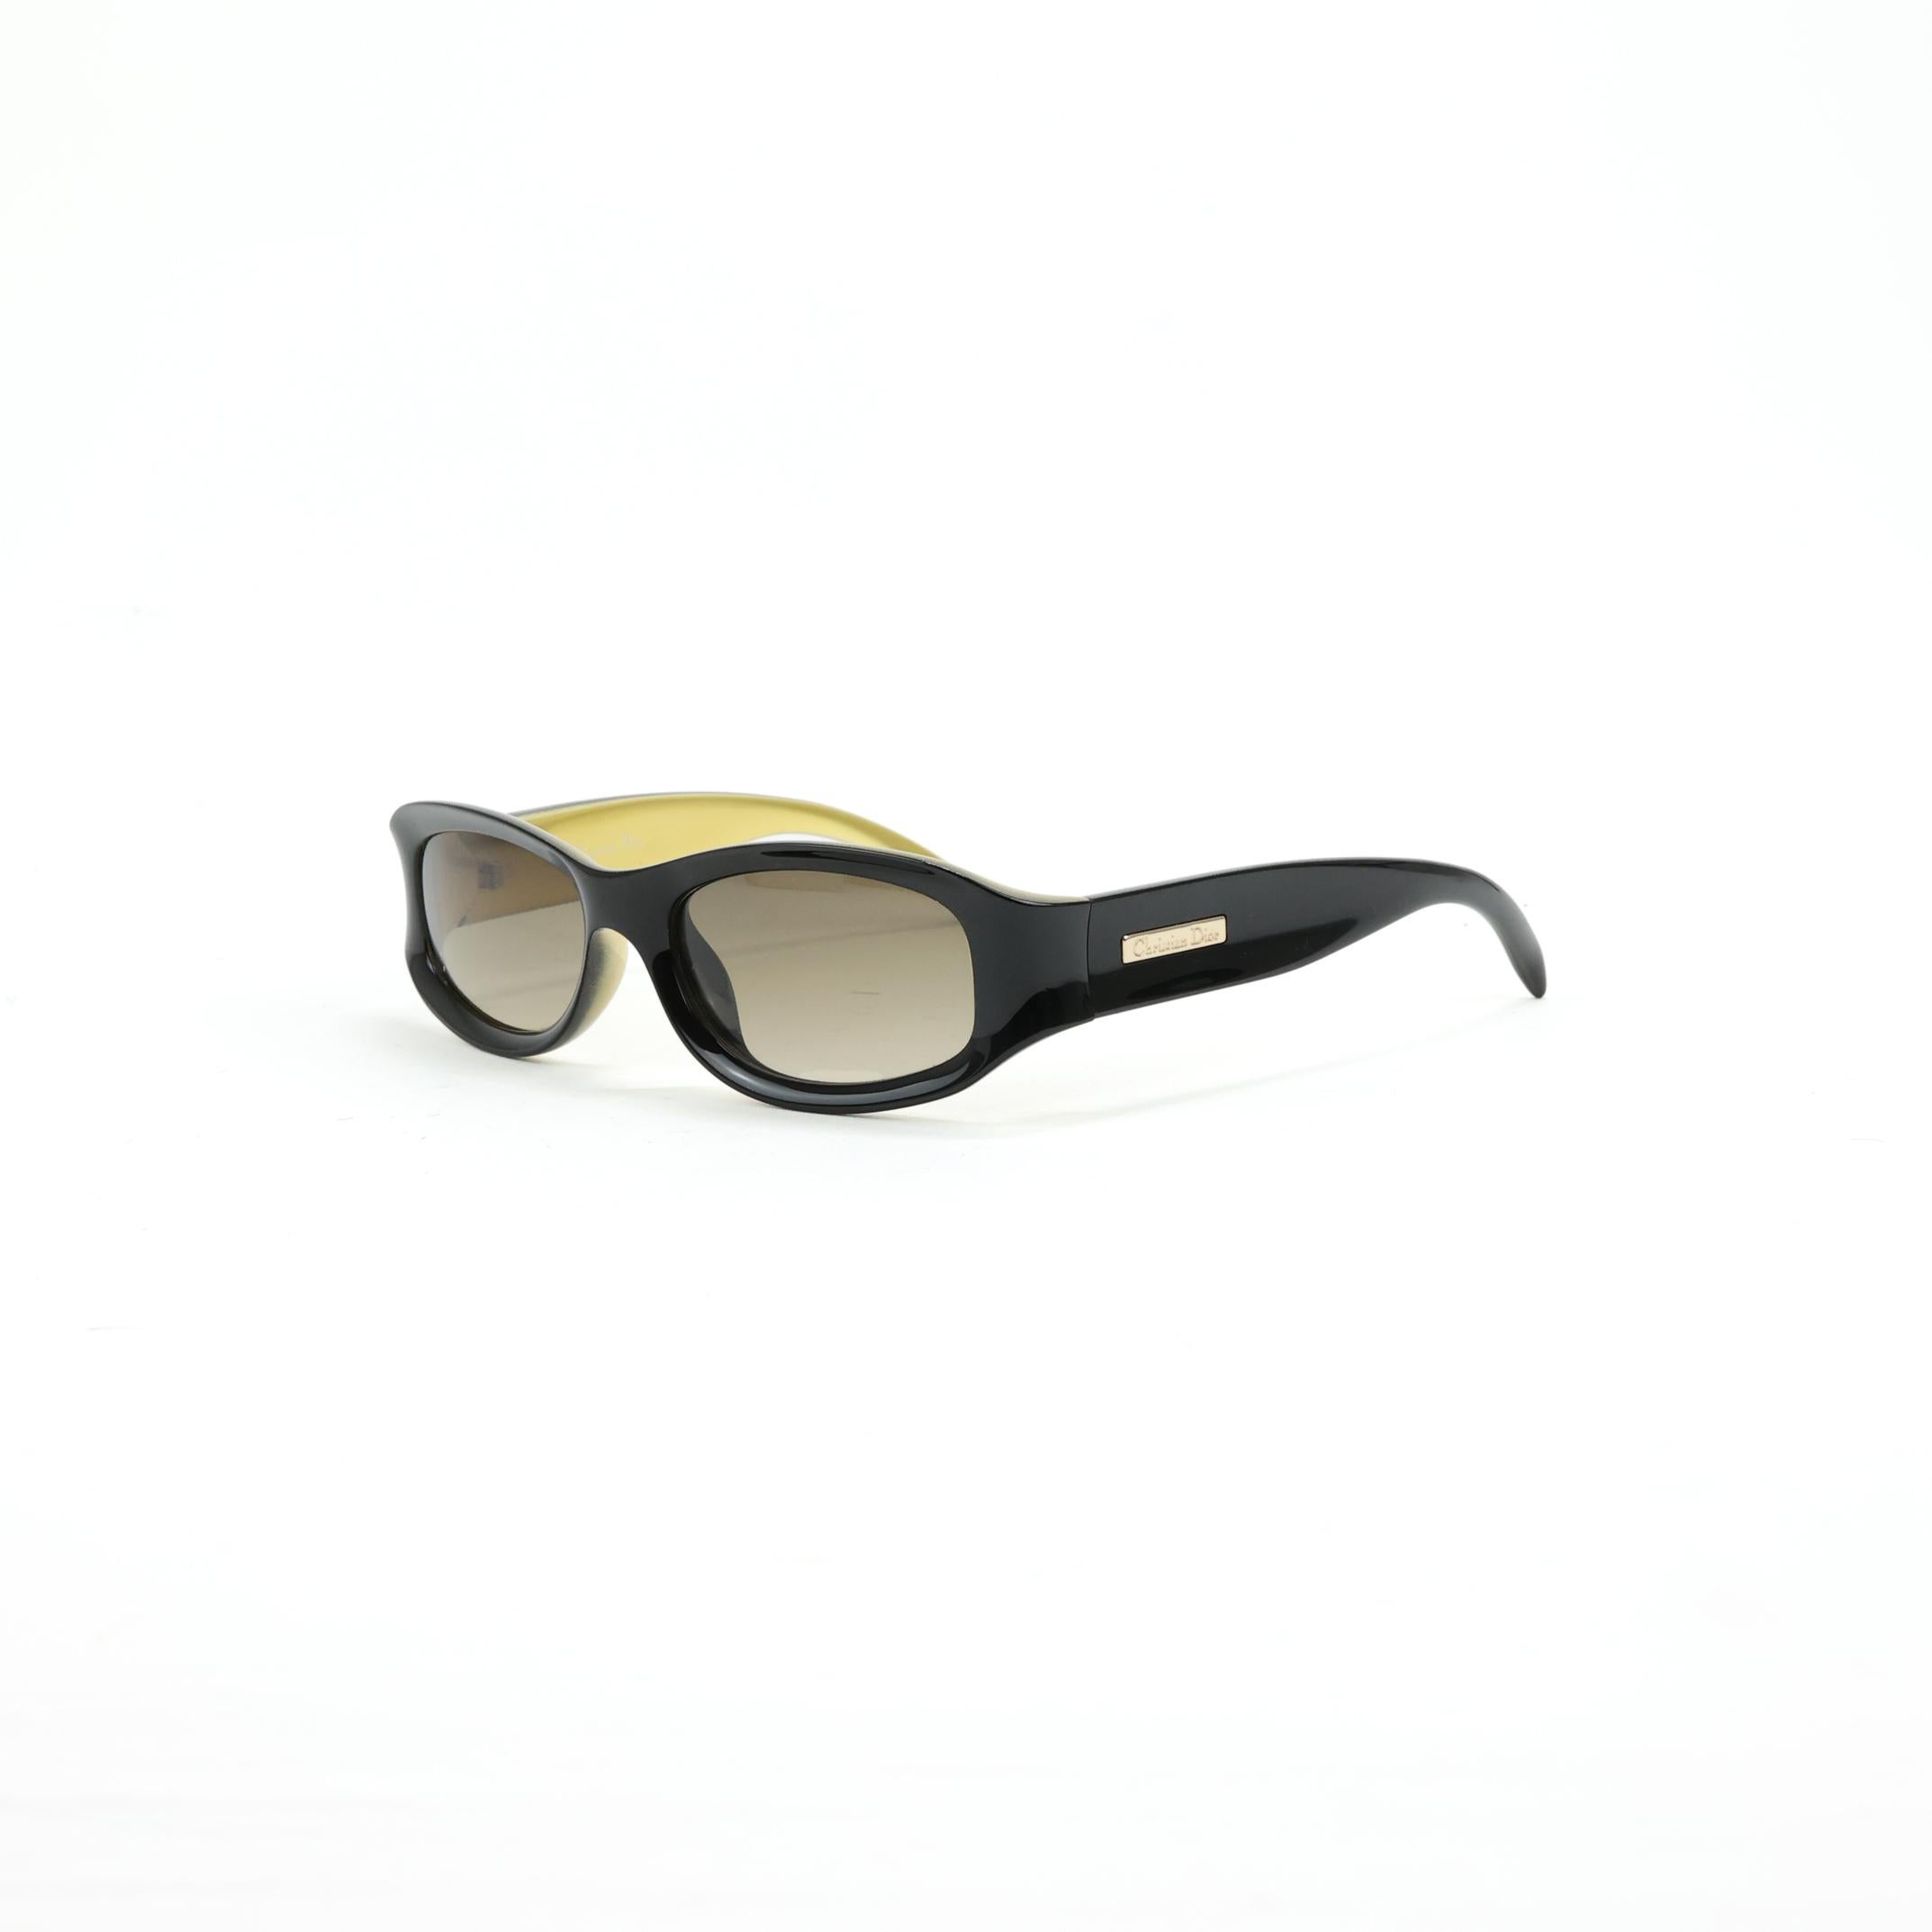 Dior sunglasses color black / gold. 

Condition: 
Really good.

Packing/accessories: 
Case.